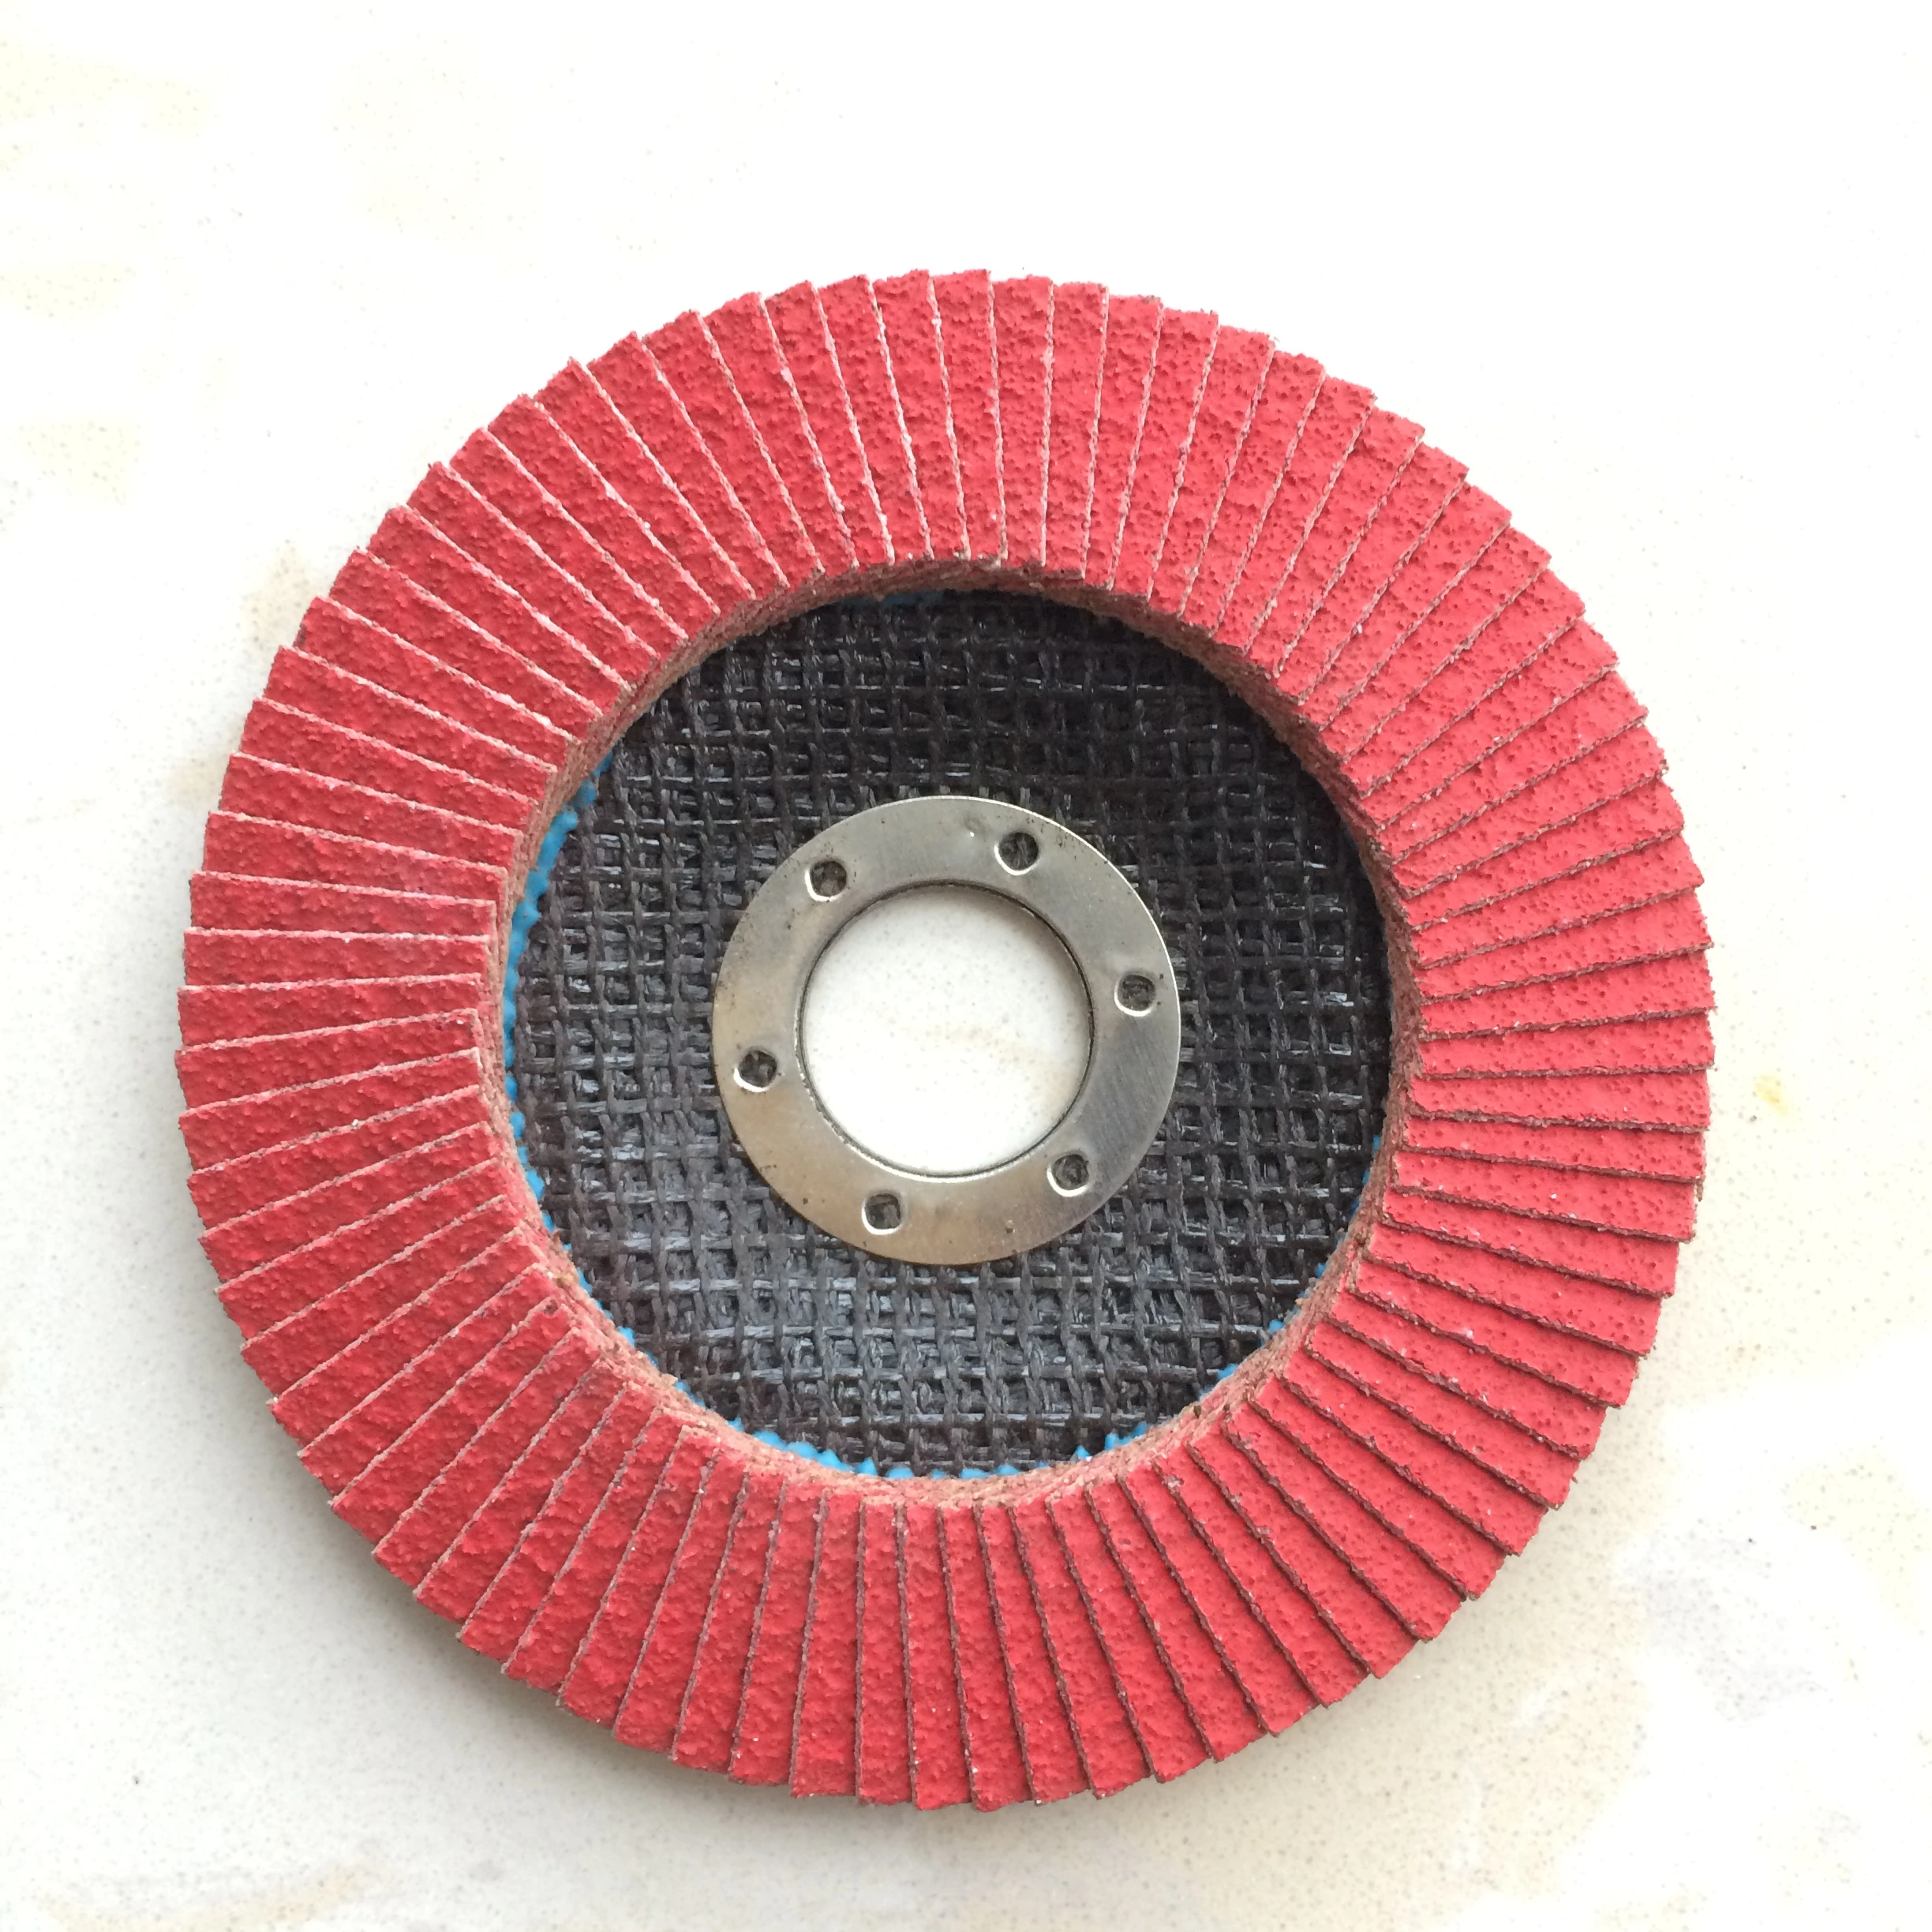 China supplier T27 & T29  Flap Disc with Ceramic Grain for metal grinding and  polishing